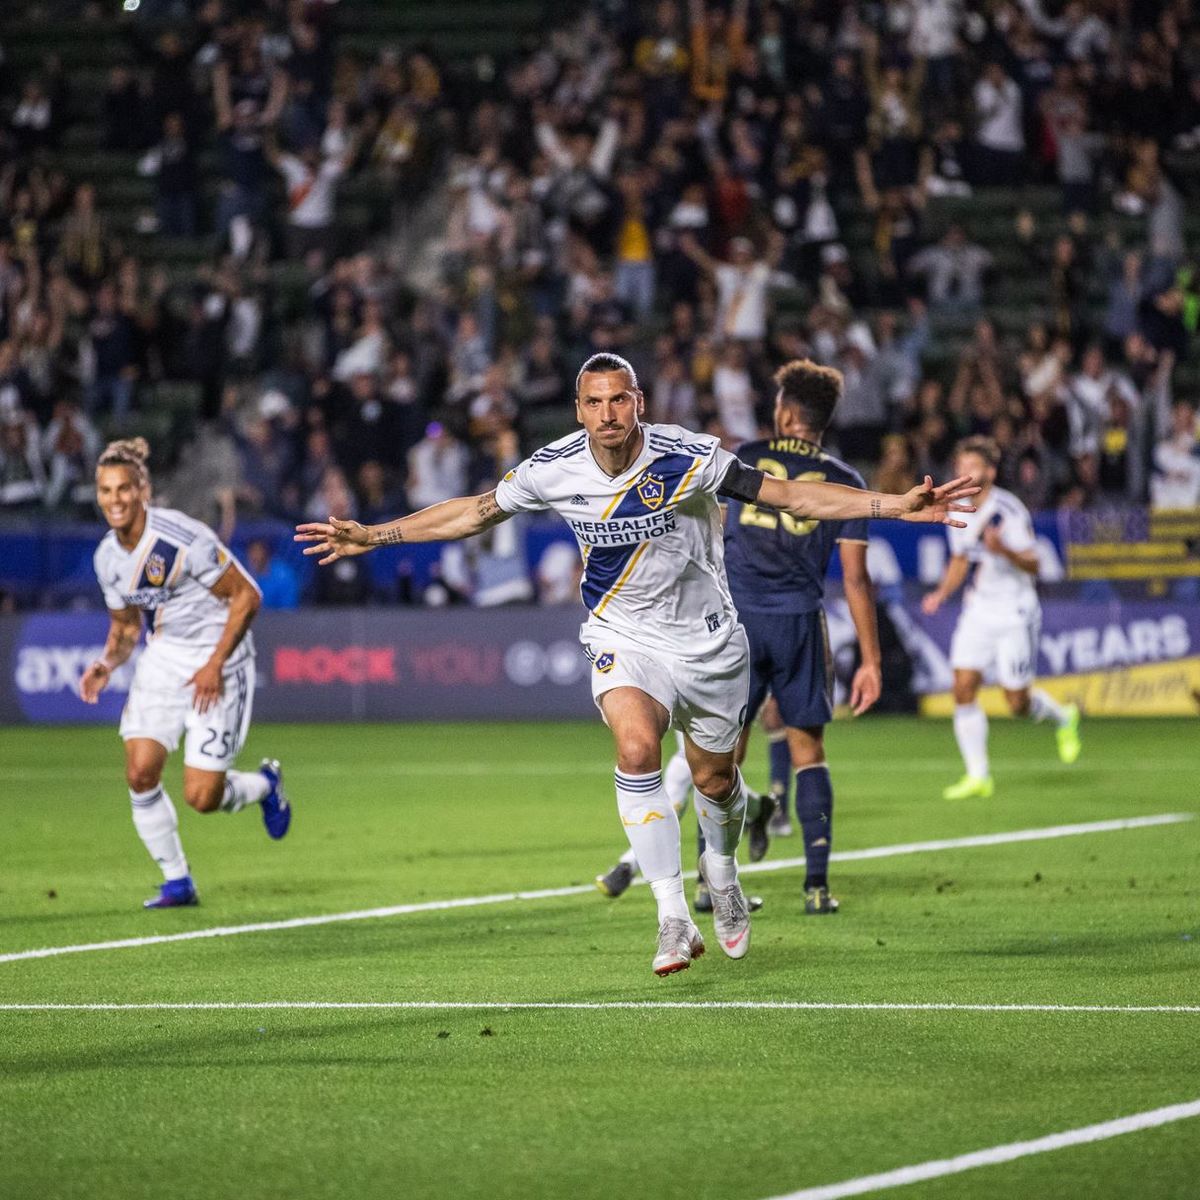 Galaxy soccer player celebrating on the field